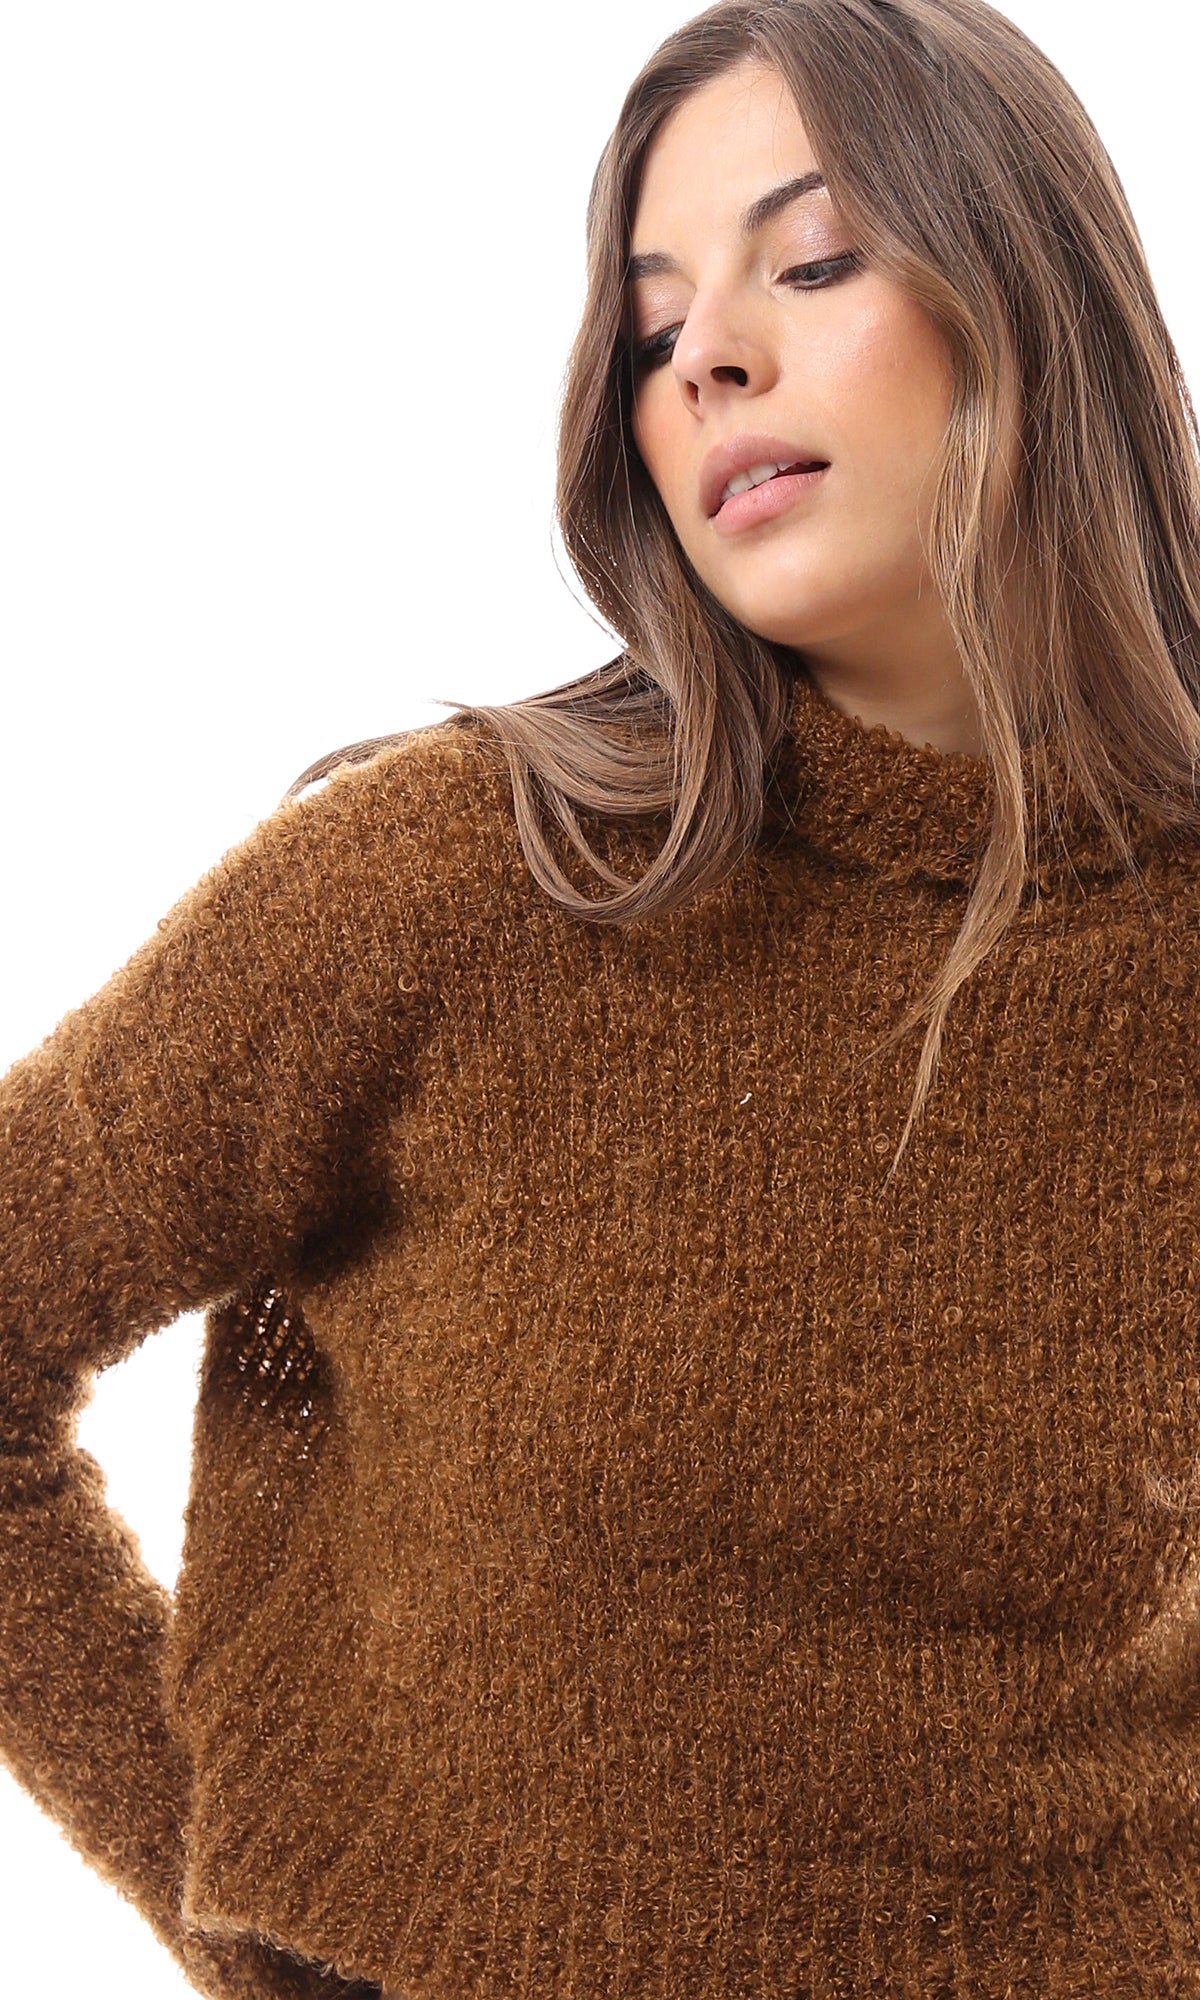 O169974 Turtle Neck Dark Camel Soft Knitted Pullover